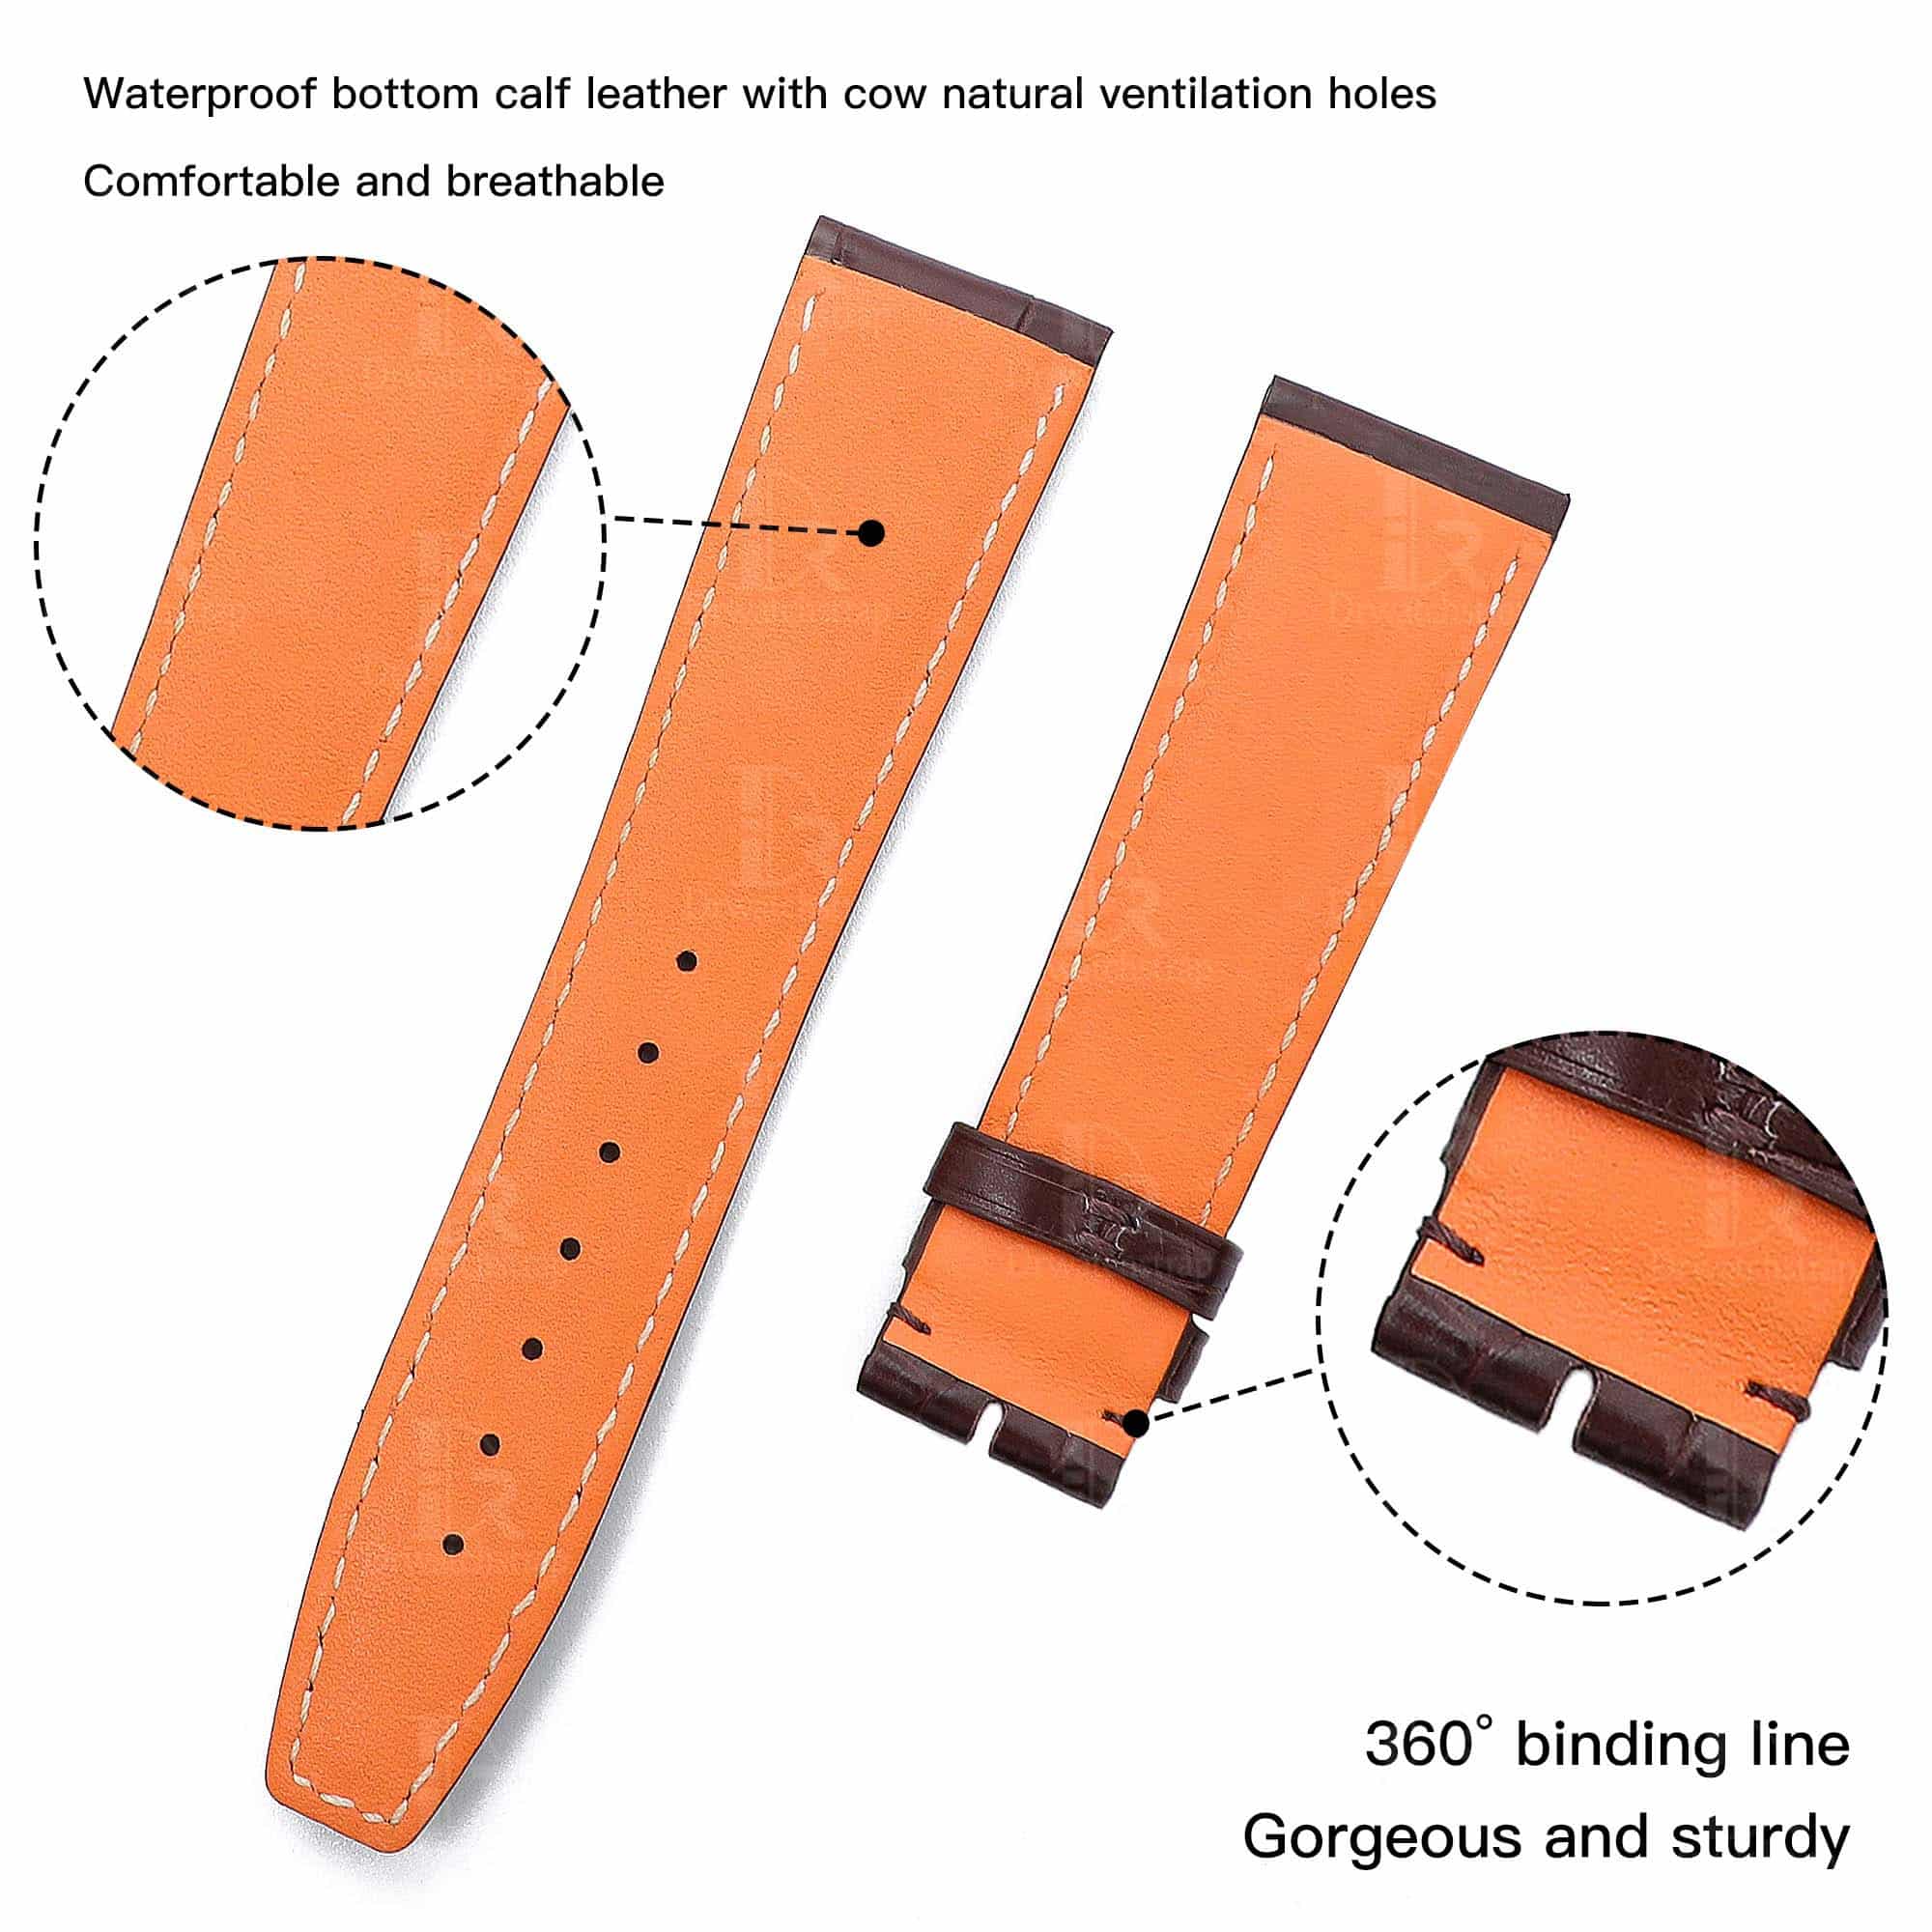 Best quality Grade A alligator Belly-scale brown leather Santoni 20mm 22mm IWC watch strap and watch band replacement for IWC Portofino / Pilot's watch at a low price - Shop handcrafted OEM watch bands online